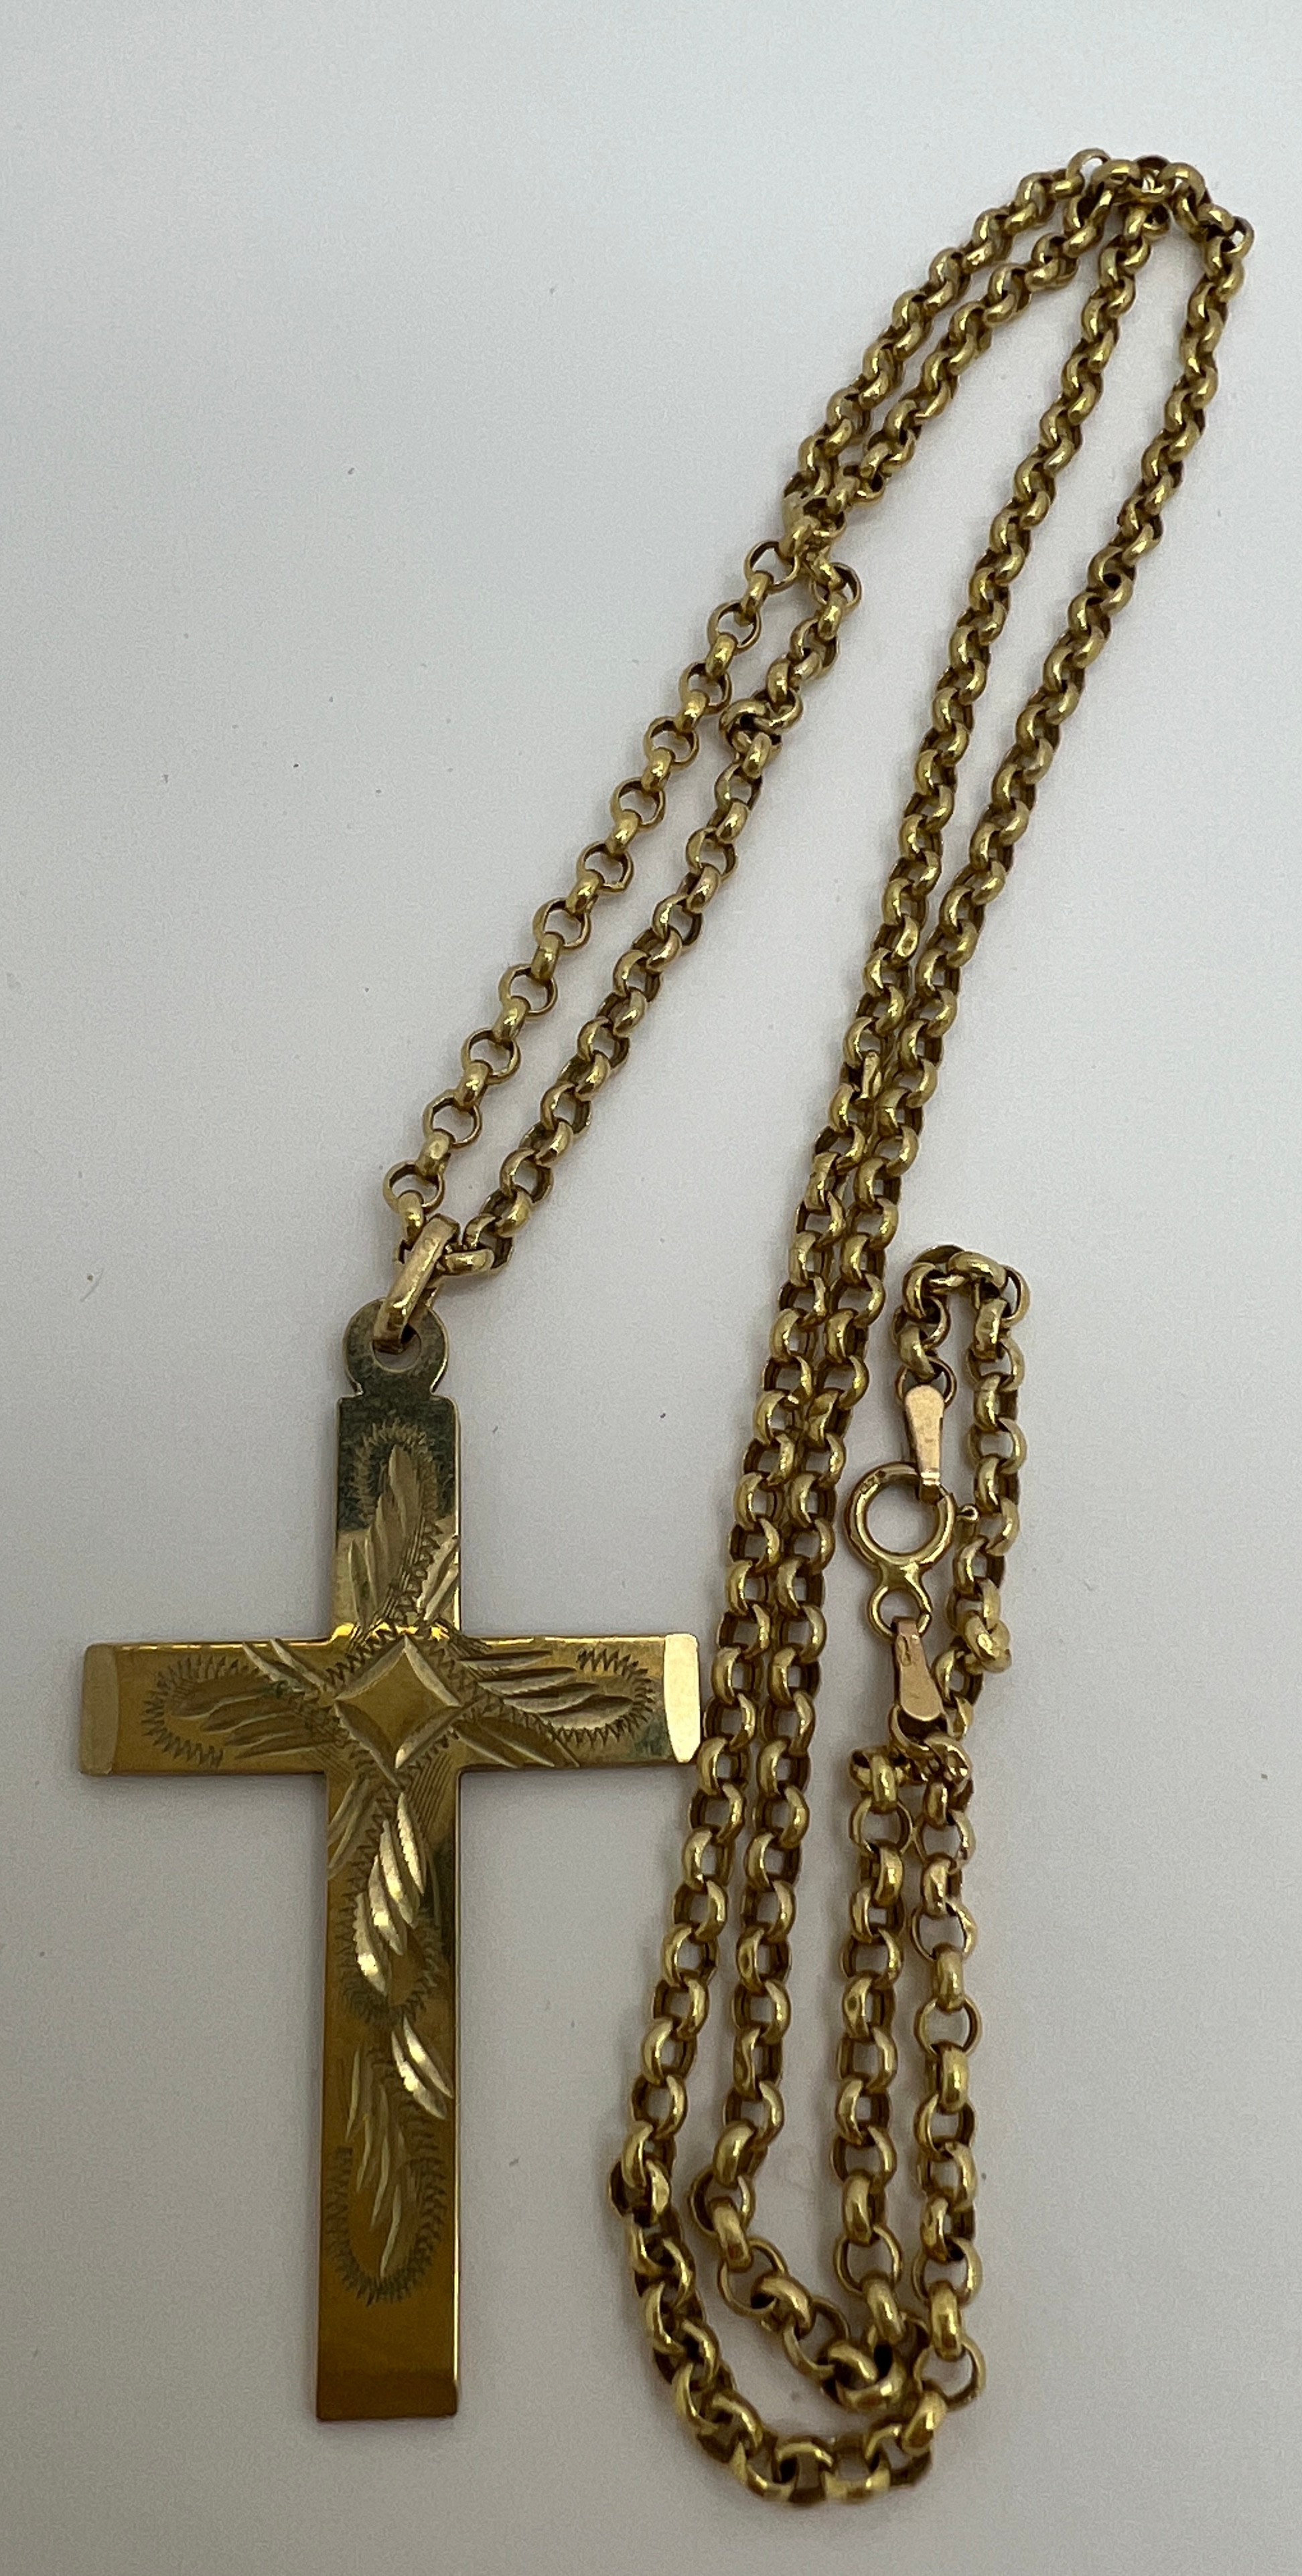 A 9 carat gold chain necklace with 9 carat gold engraved crucifix pendant. Length of chain 50cm.